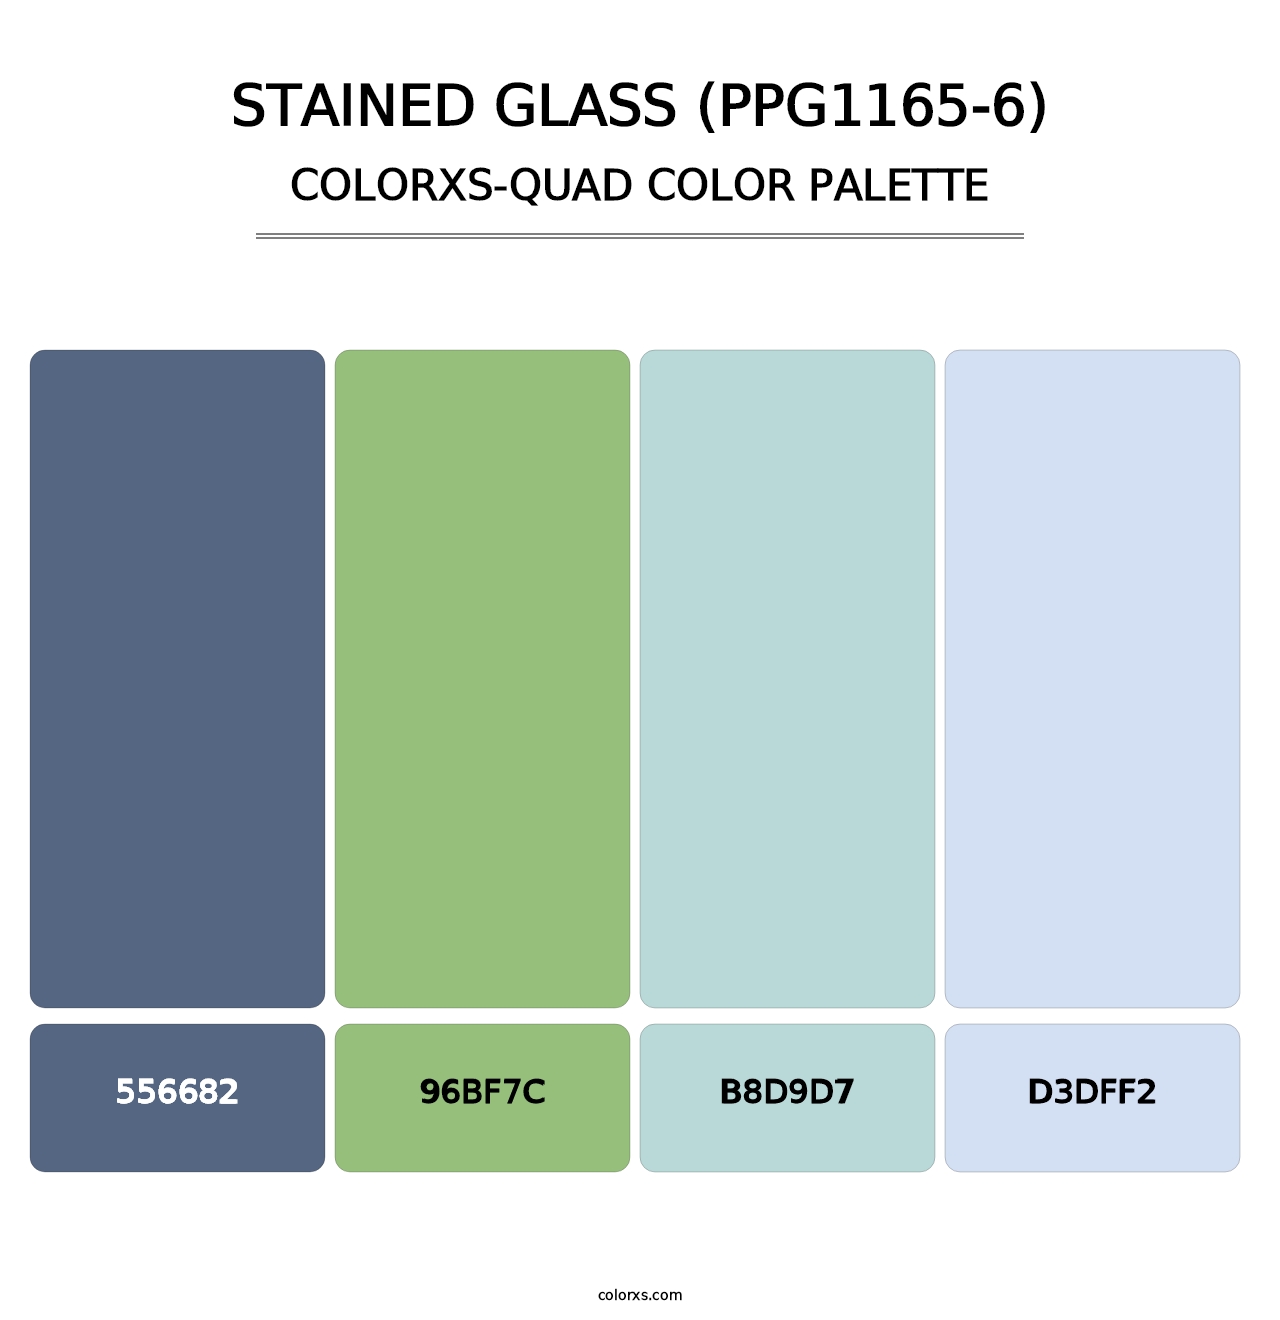 Stained Glass (PPG1165-6) - Colorxs Quad Palette